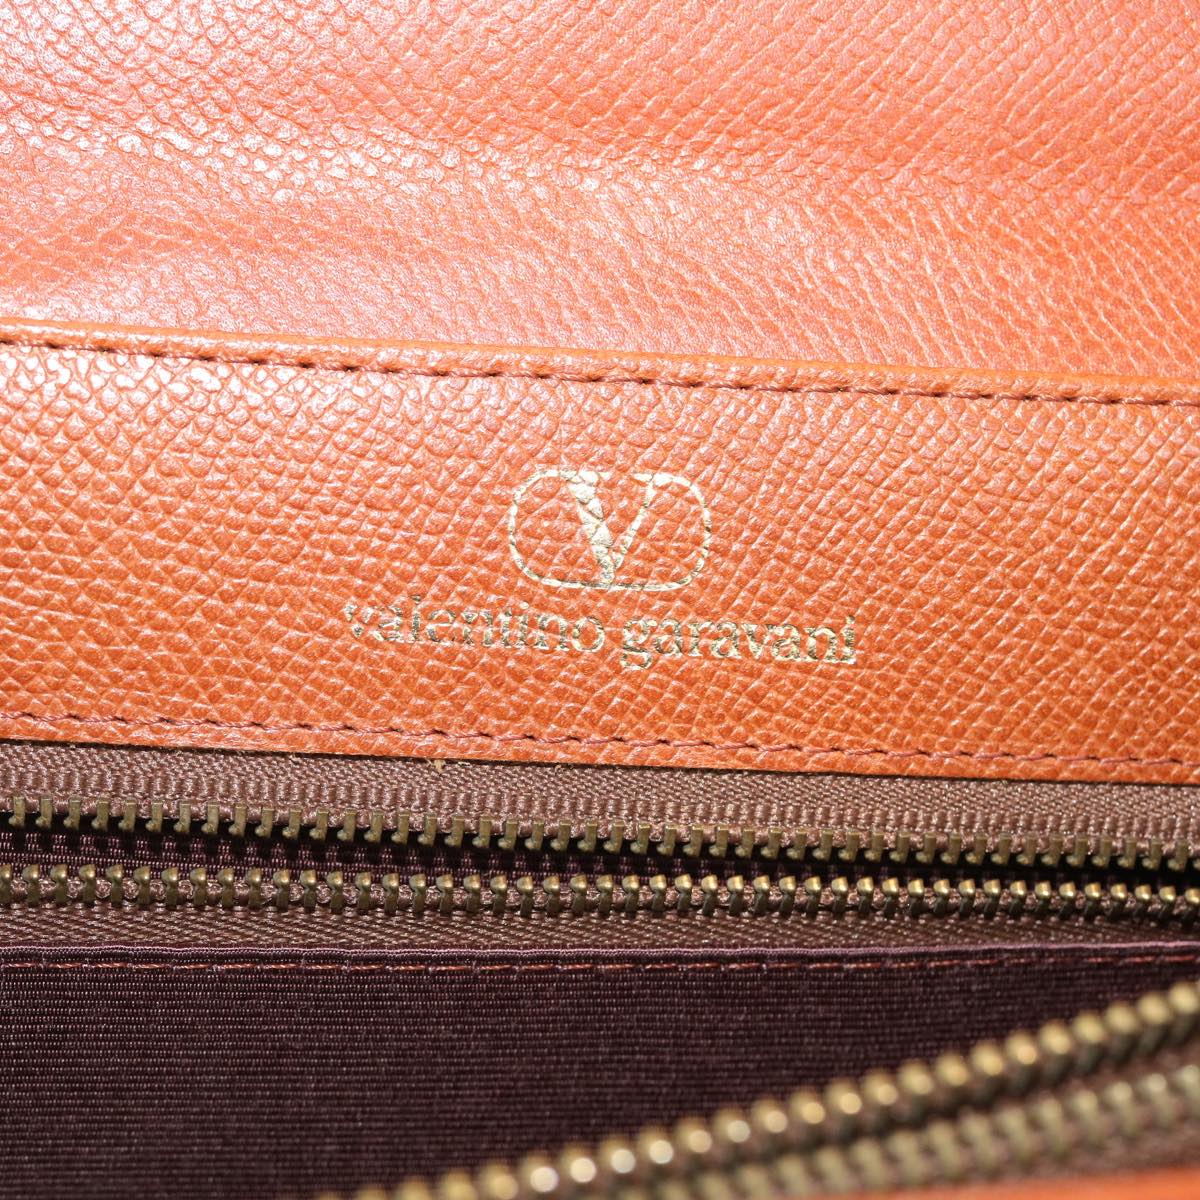 VALENTINO Hand Bag Leather 2way Brown Auth 52014